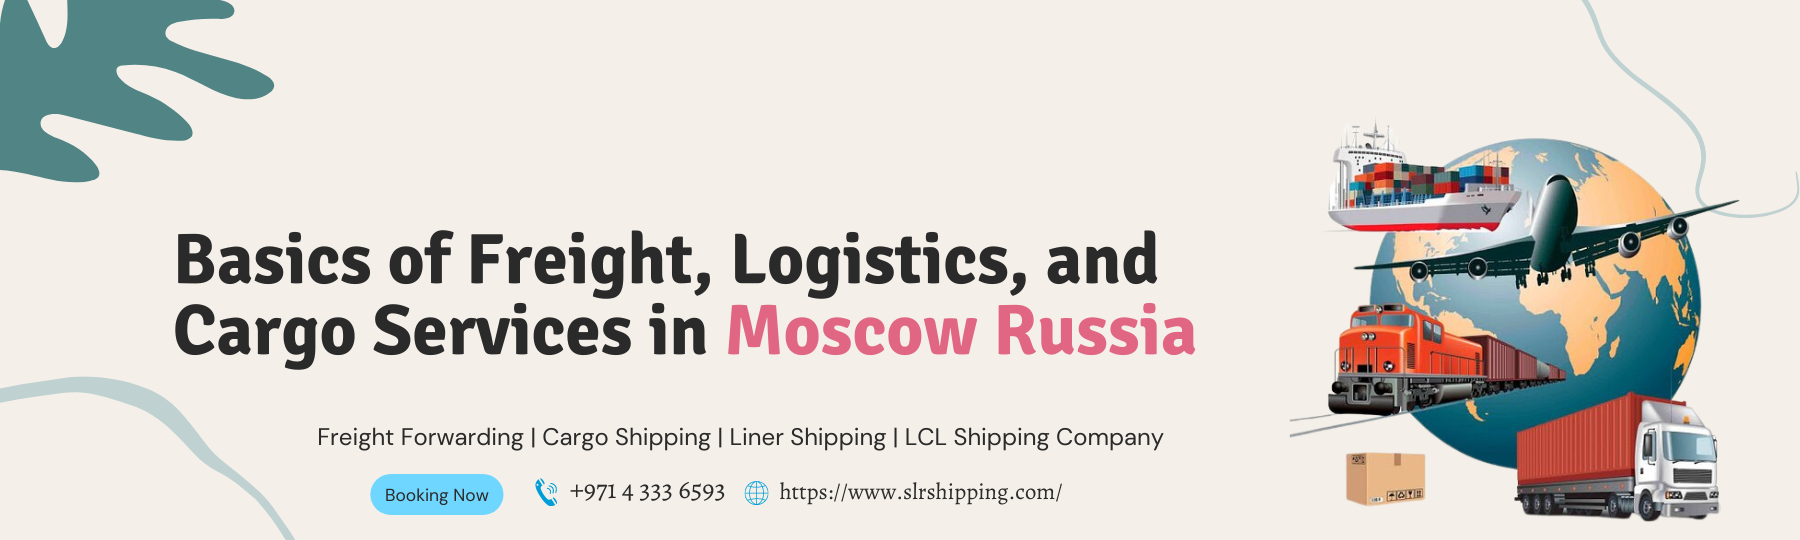 Basics You Need to Know About Freight Forwarding Company in Russia